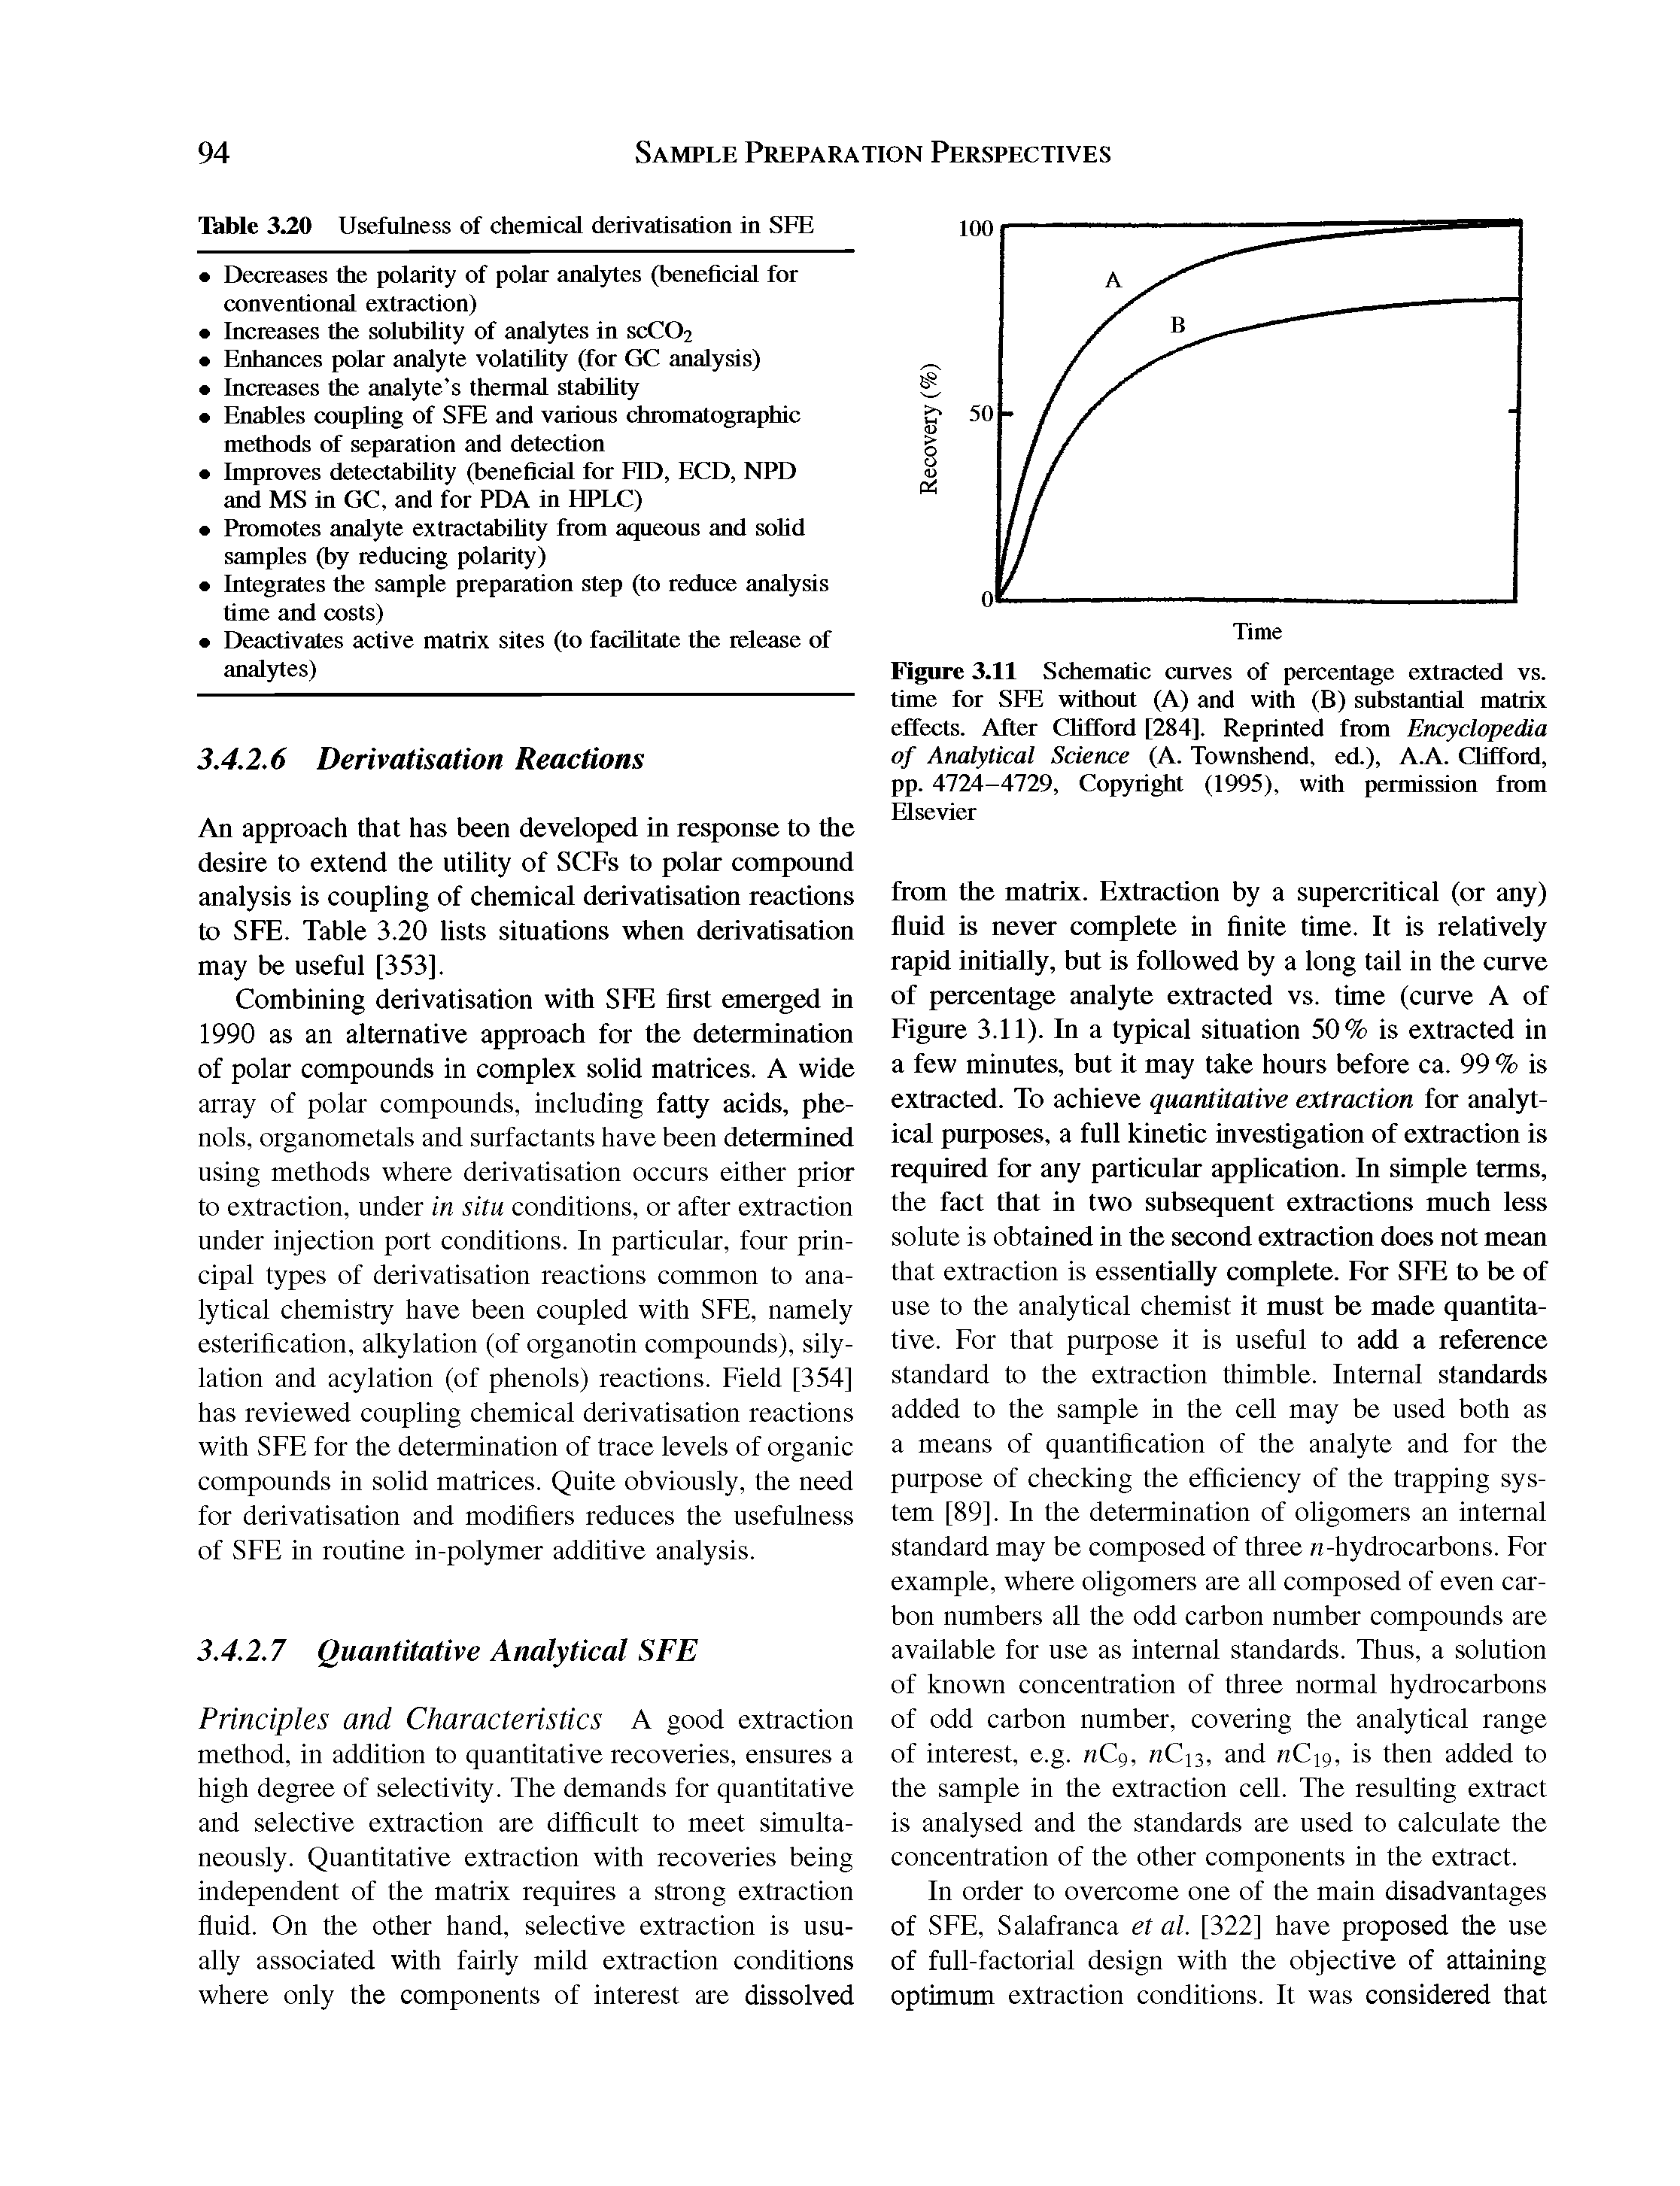 Figure 3.11 Schematic curves of percentage extracted vs. time for SFE without (A) and with (B) substantial matrix effects. After Clifford [284], Reprinted from Encyclopedia of Analytical Science (A. Townshend, ed.), A.A. Clifford, pp. 4724-4729, Copyright (1995), with permission from Elsevier...